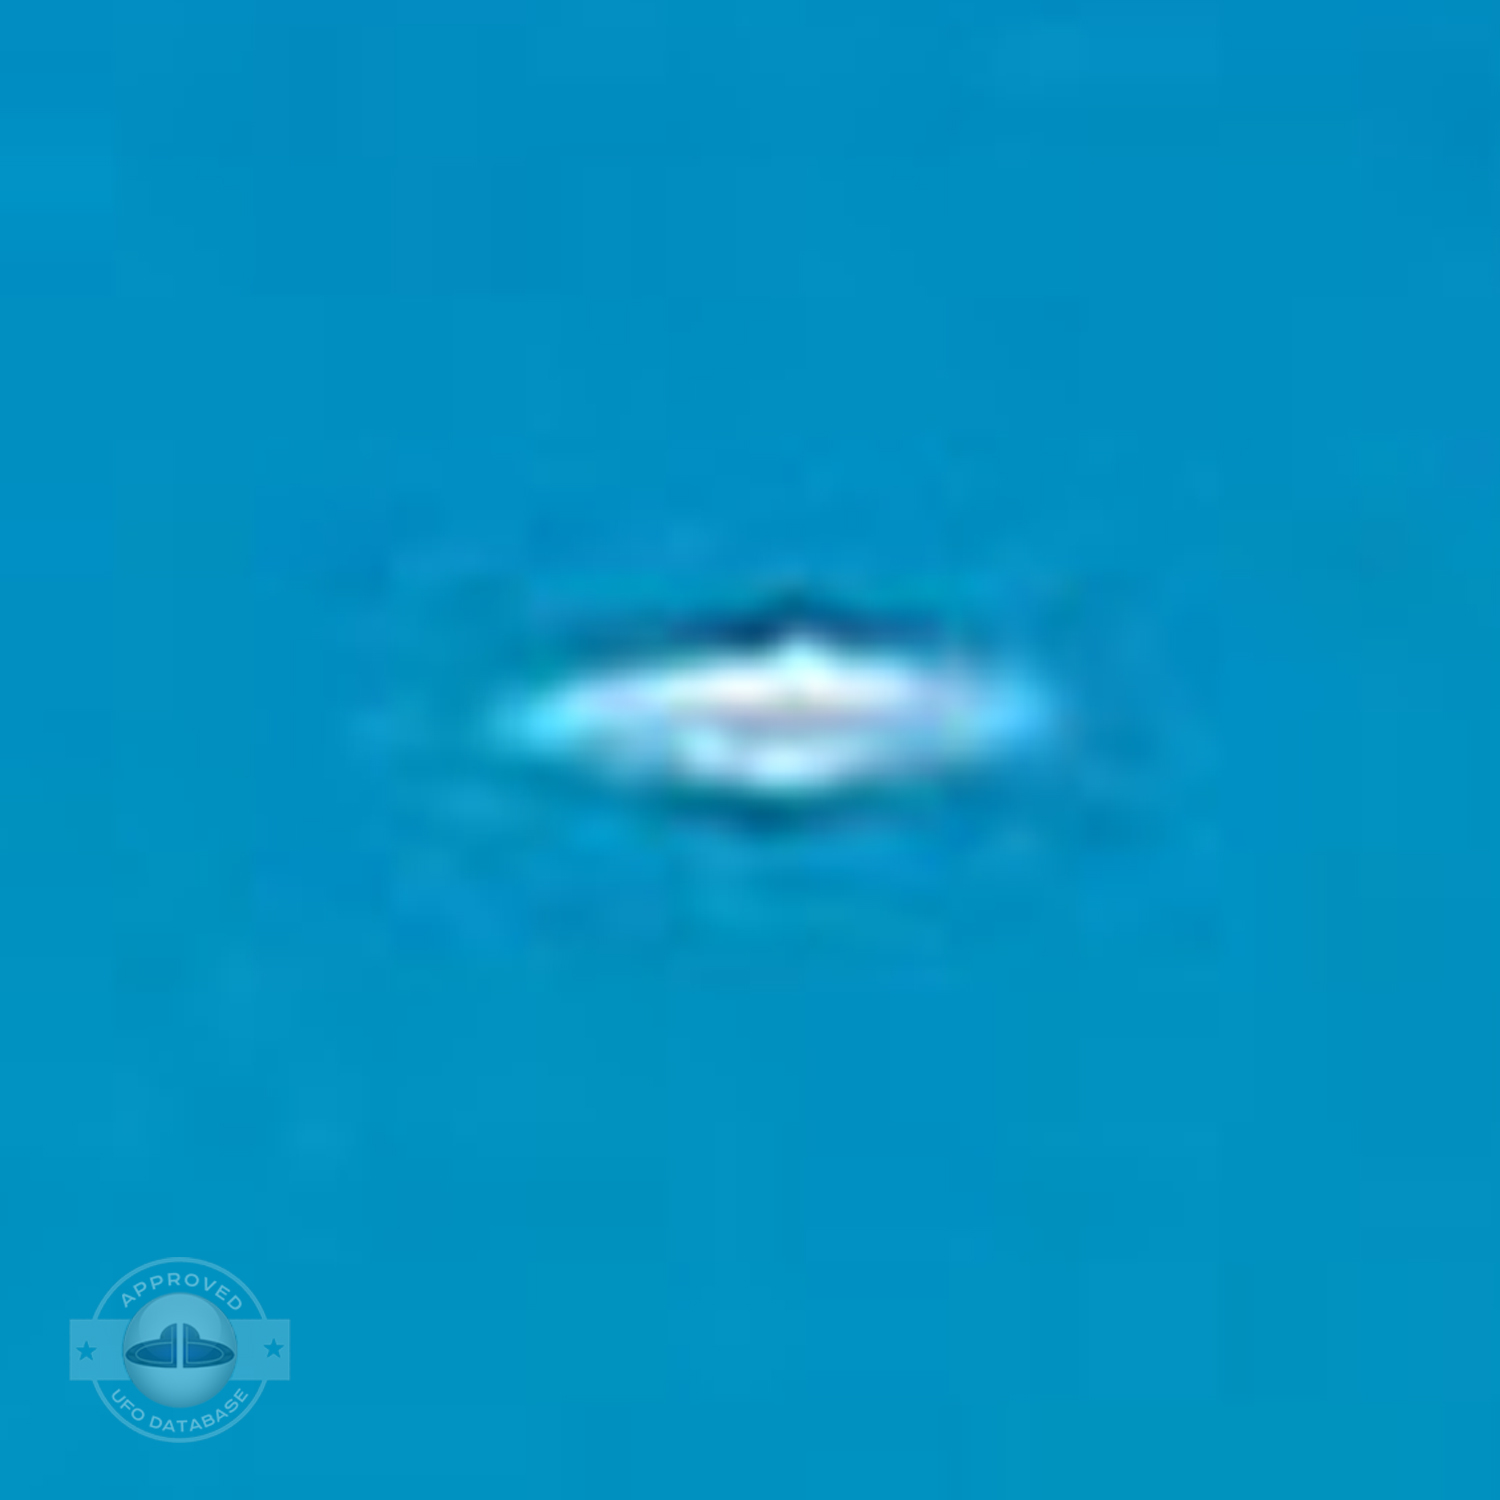 White UFO passing in cloudless turquoise sky over Sao Paulo Brazil UFO Picture #204-4